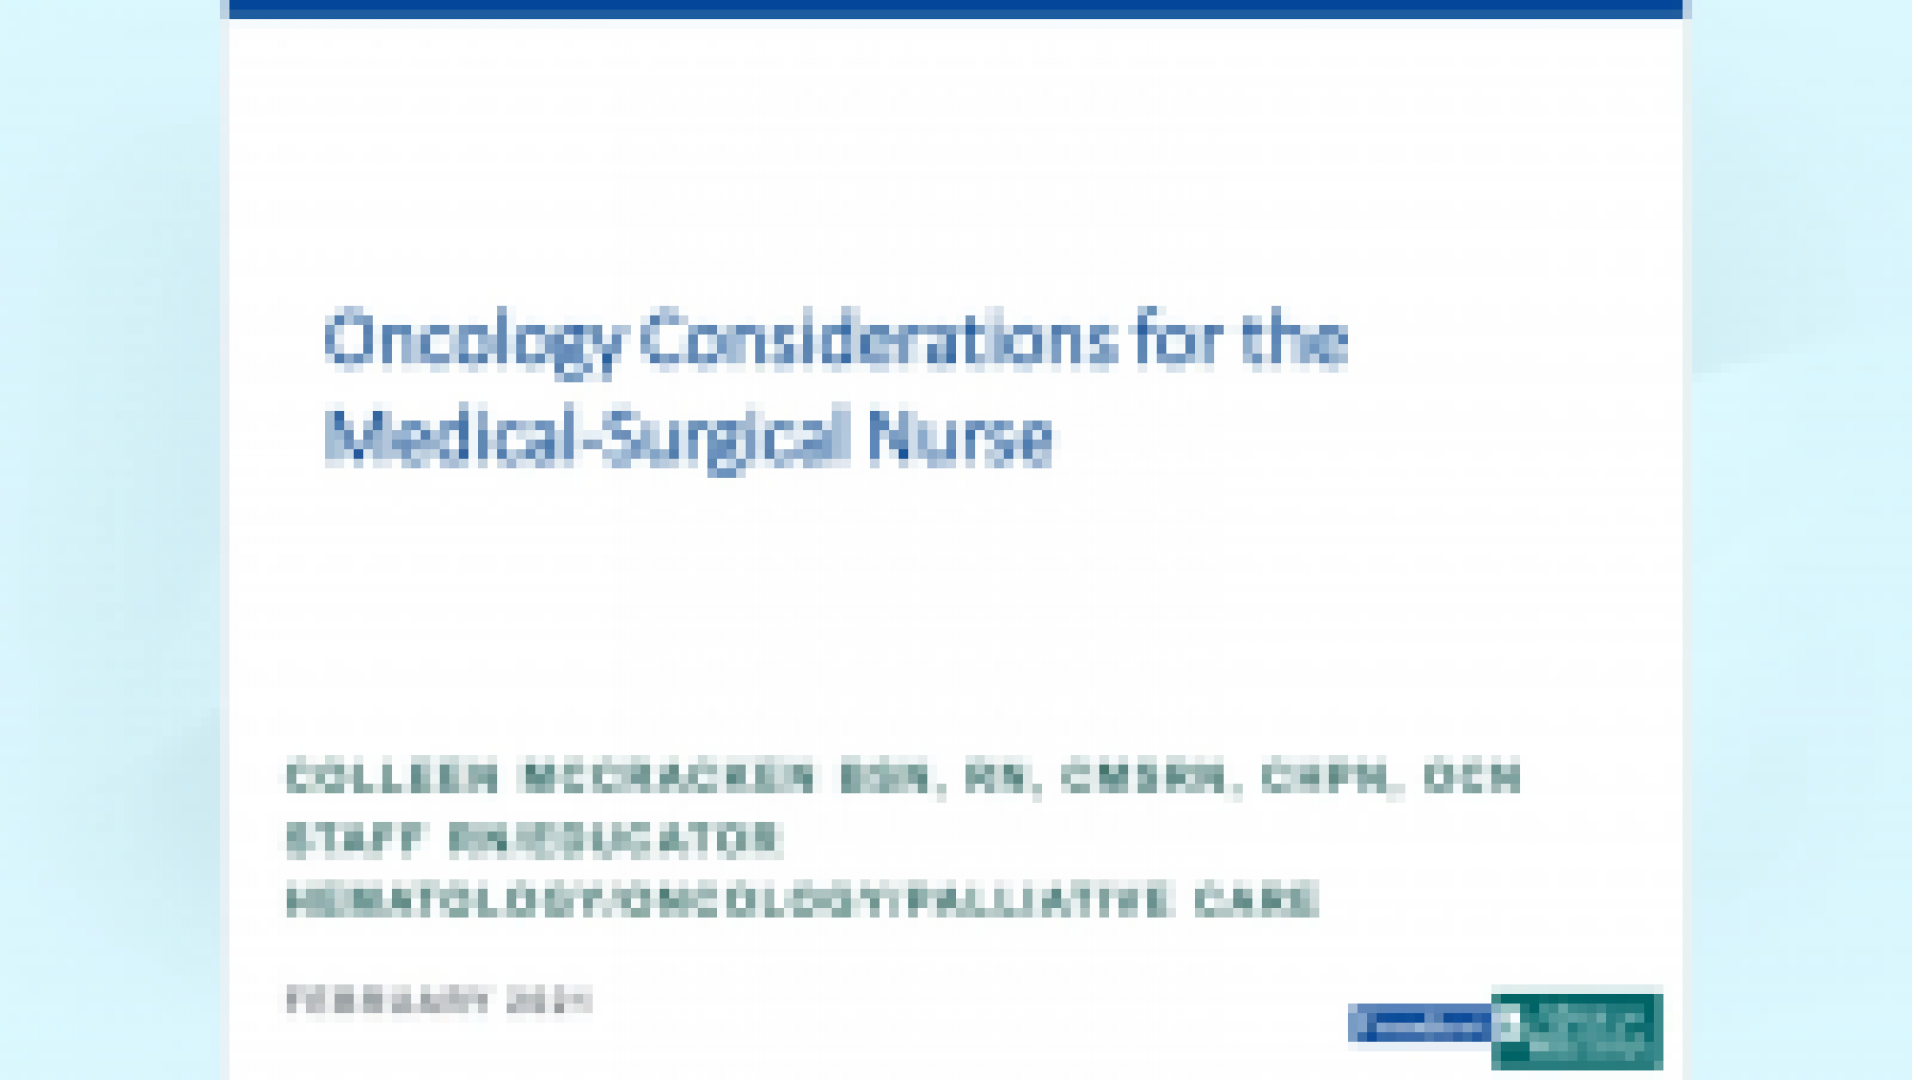 Oncology Considerations for the Medical-Surgical Nurse